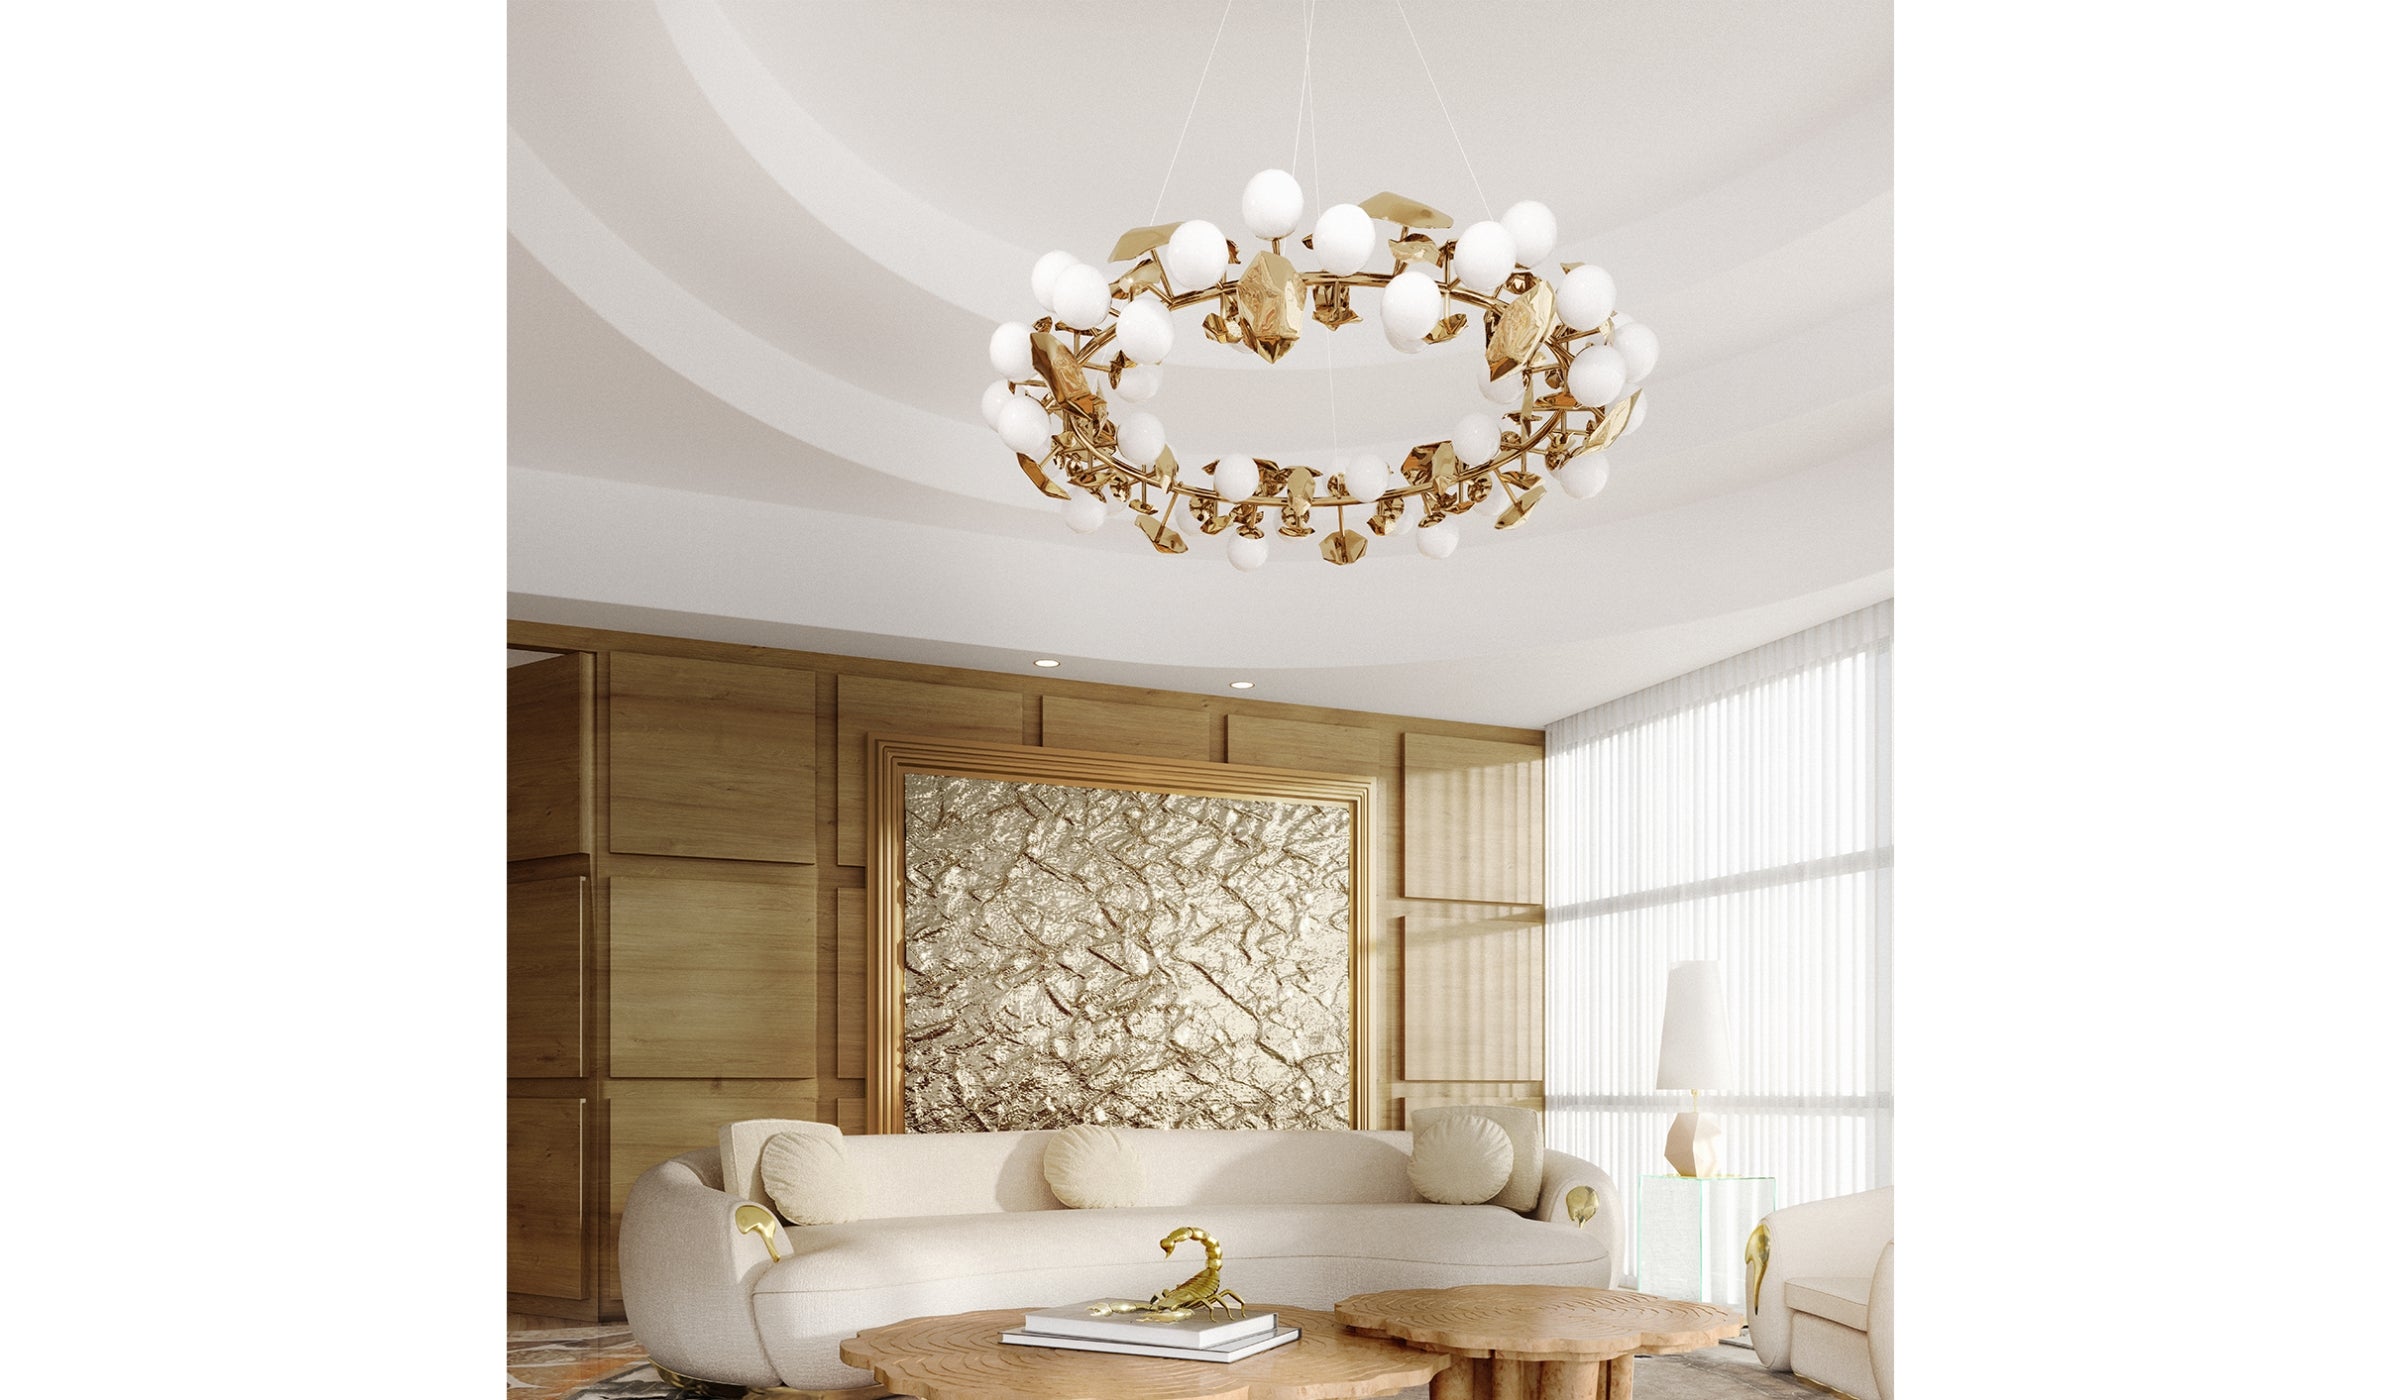 Hera round I - Luxury pendant light in polished brass and glass for sophisticated decoration